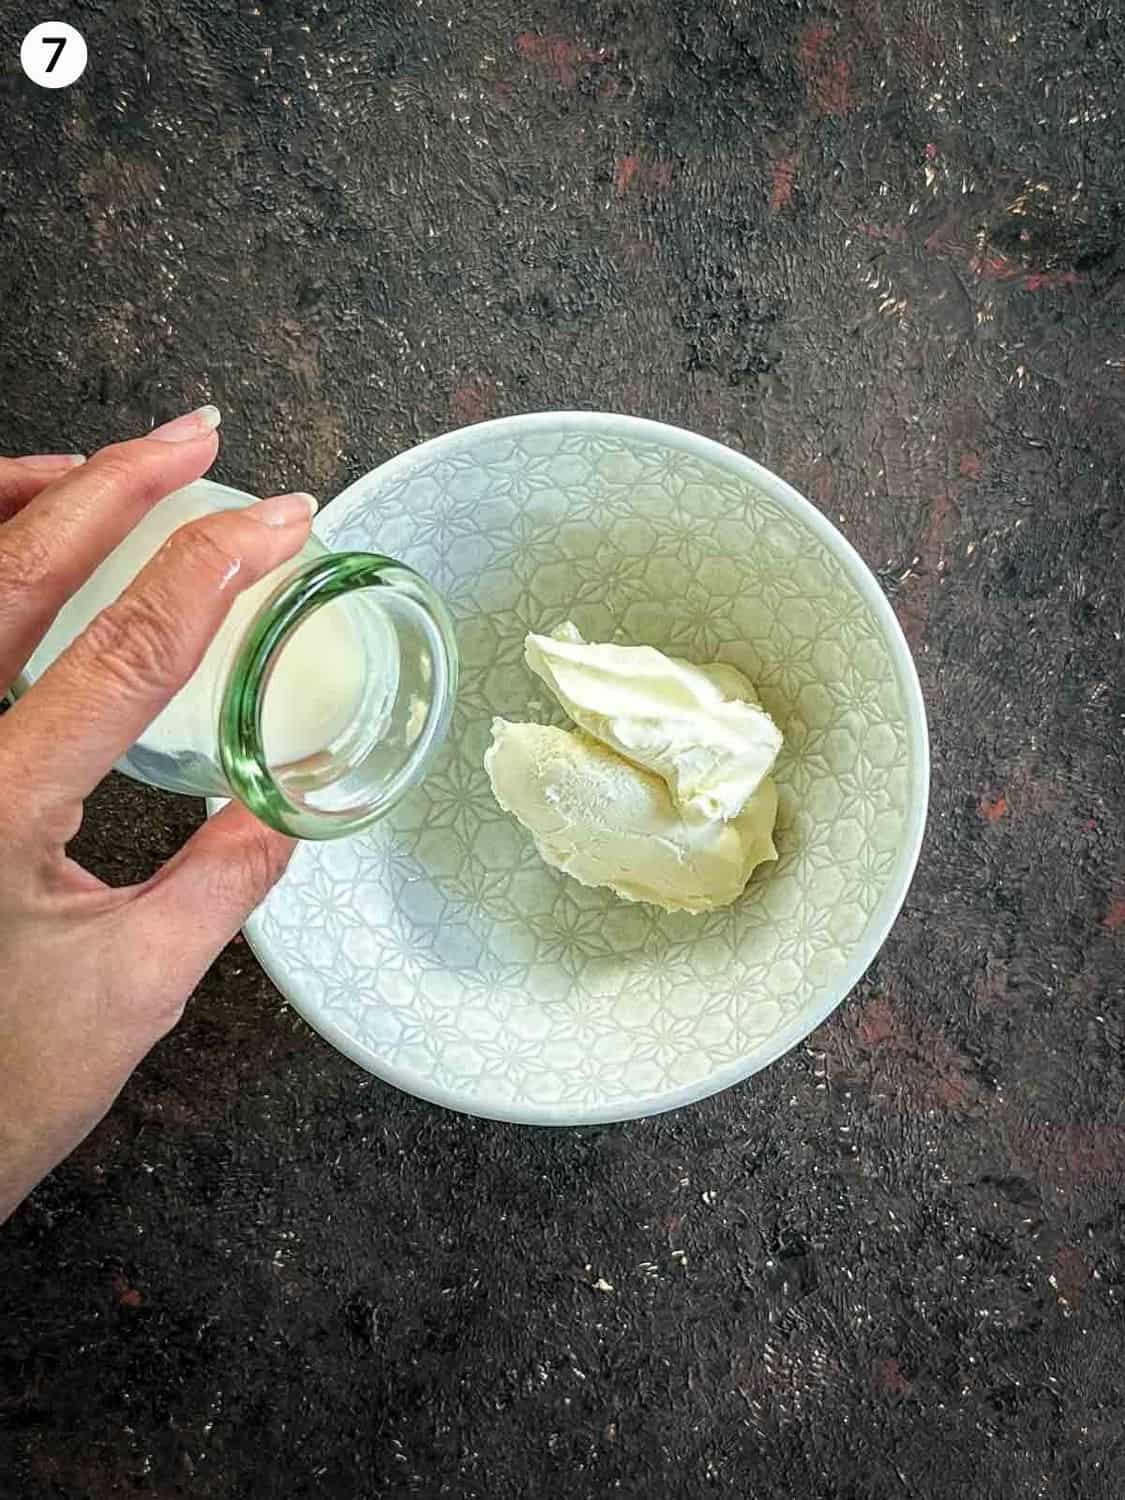 Adding milk from a glass jar to quark cheese in a small white bowl